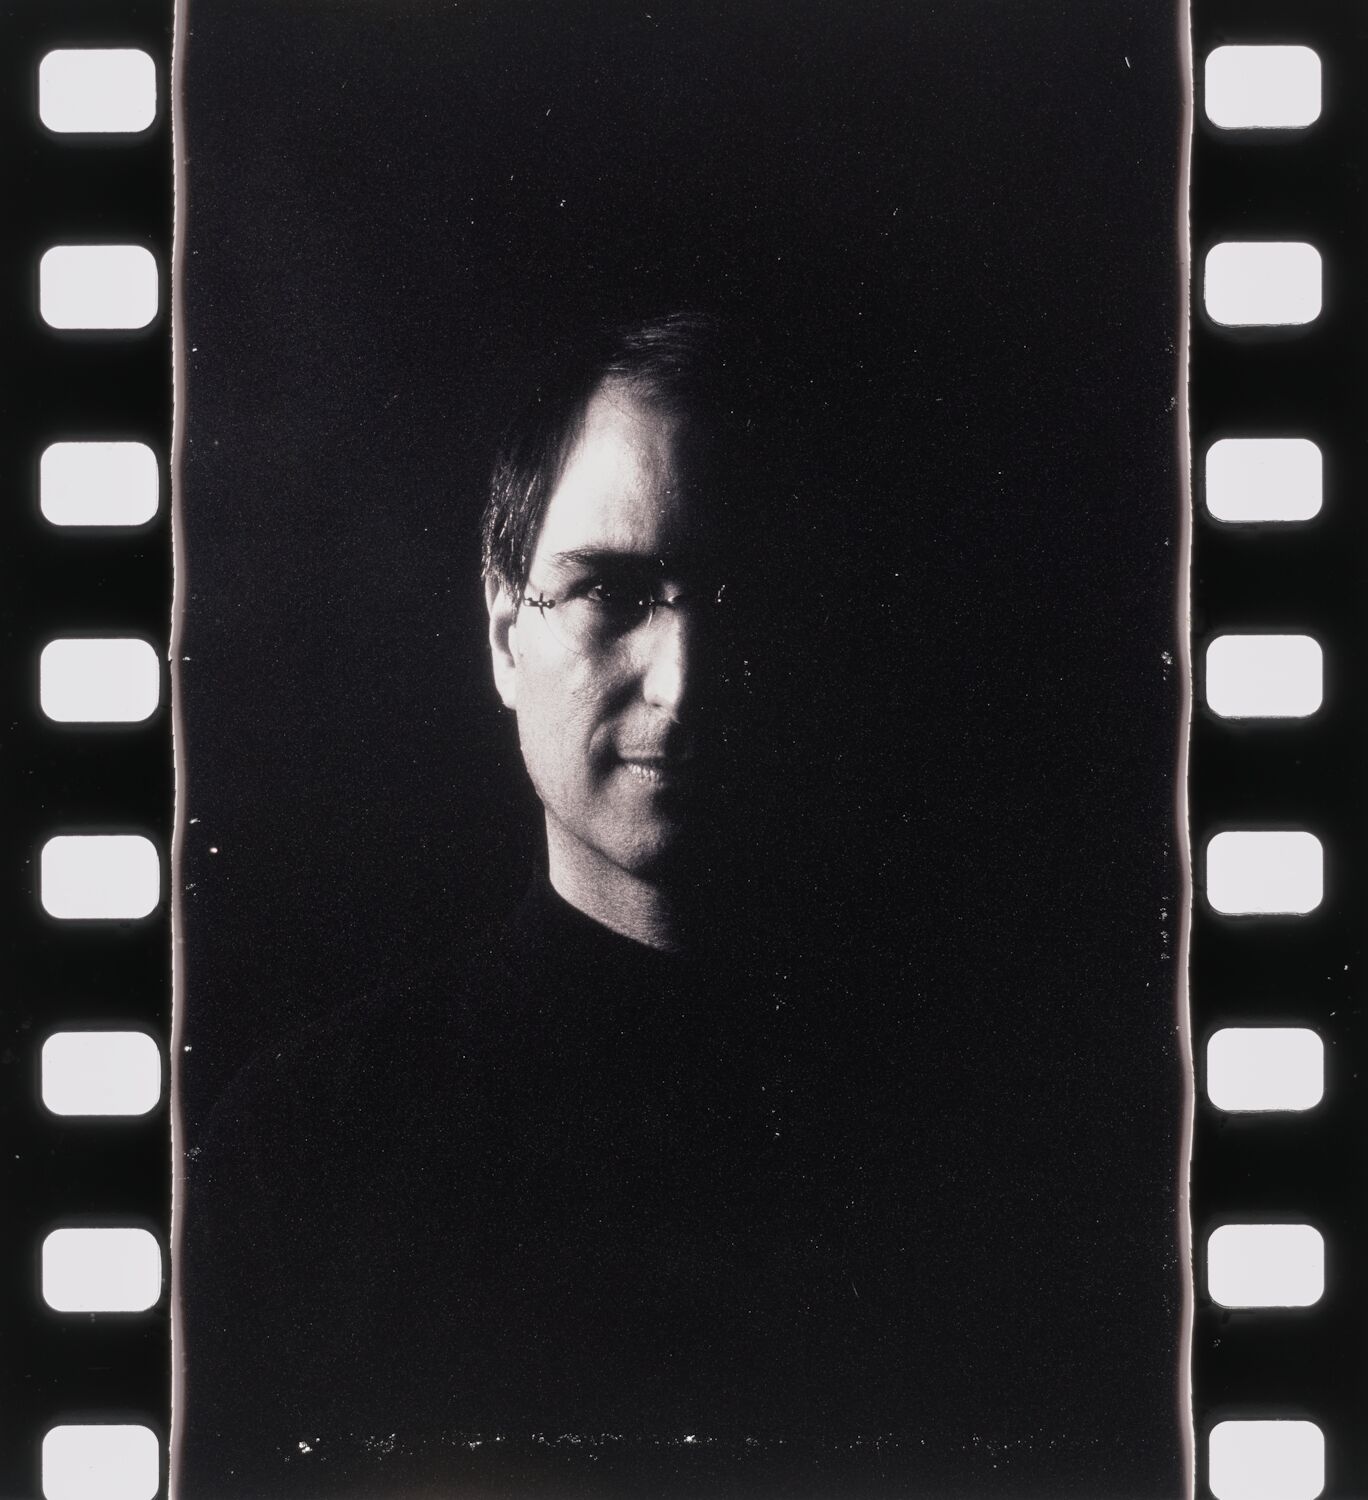 A photograph from a reel shows Steve in portrait. Only the left side of his face is visible; the rest is in deep shadow.